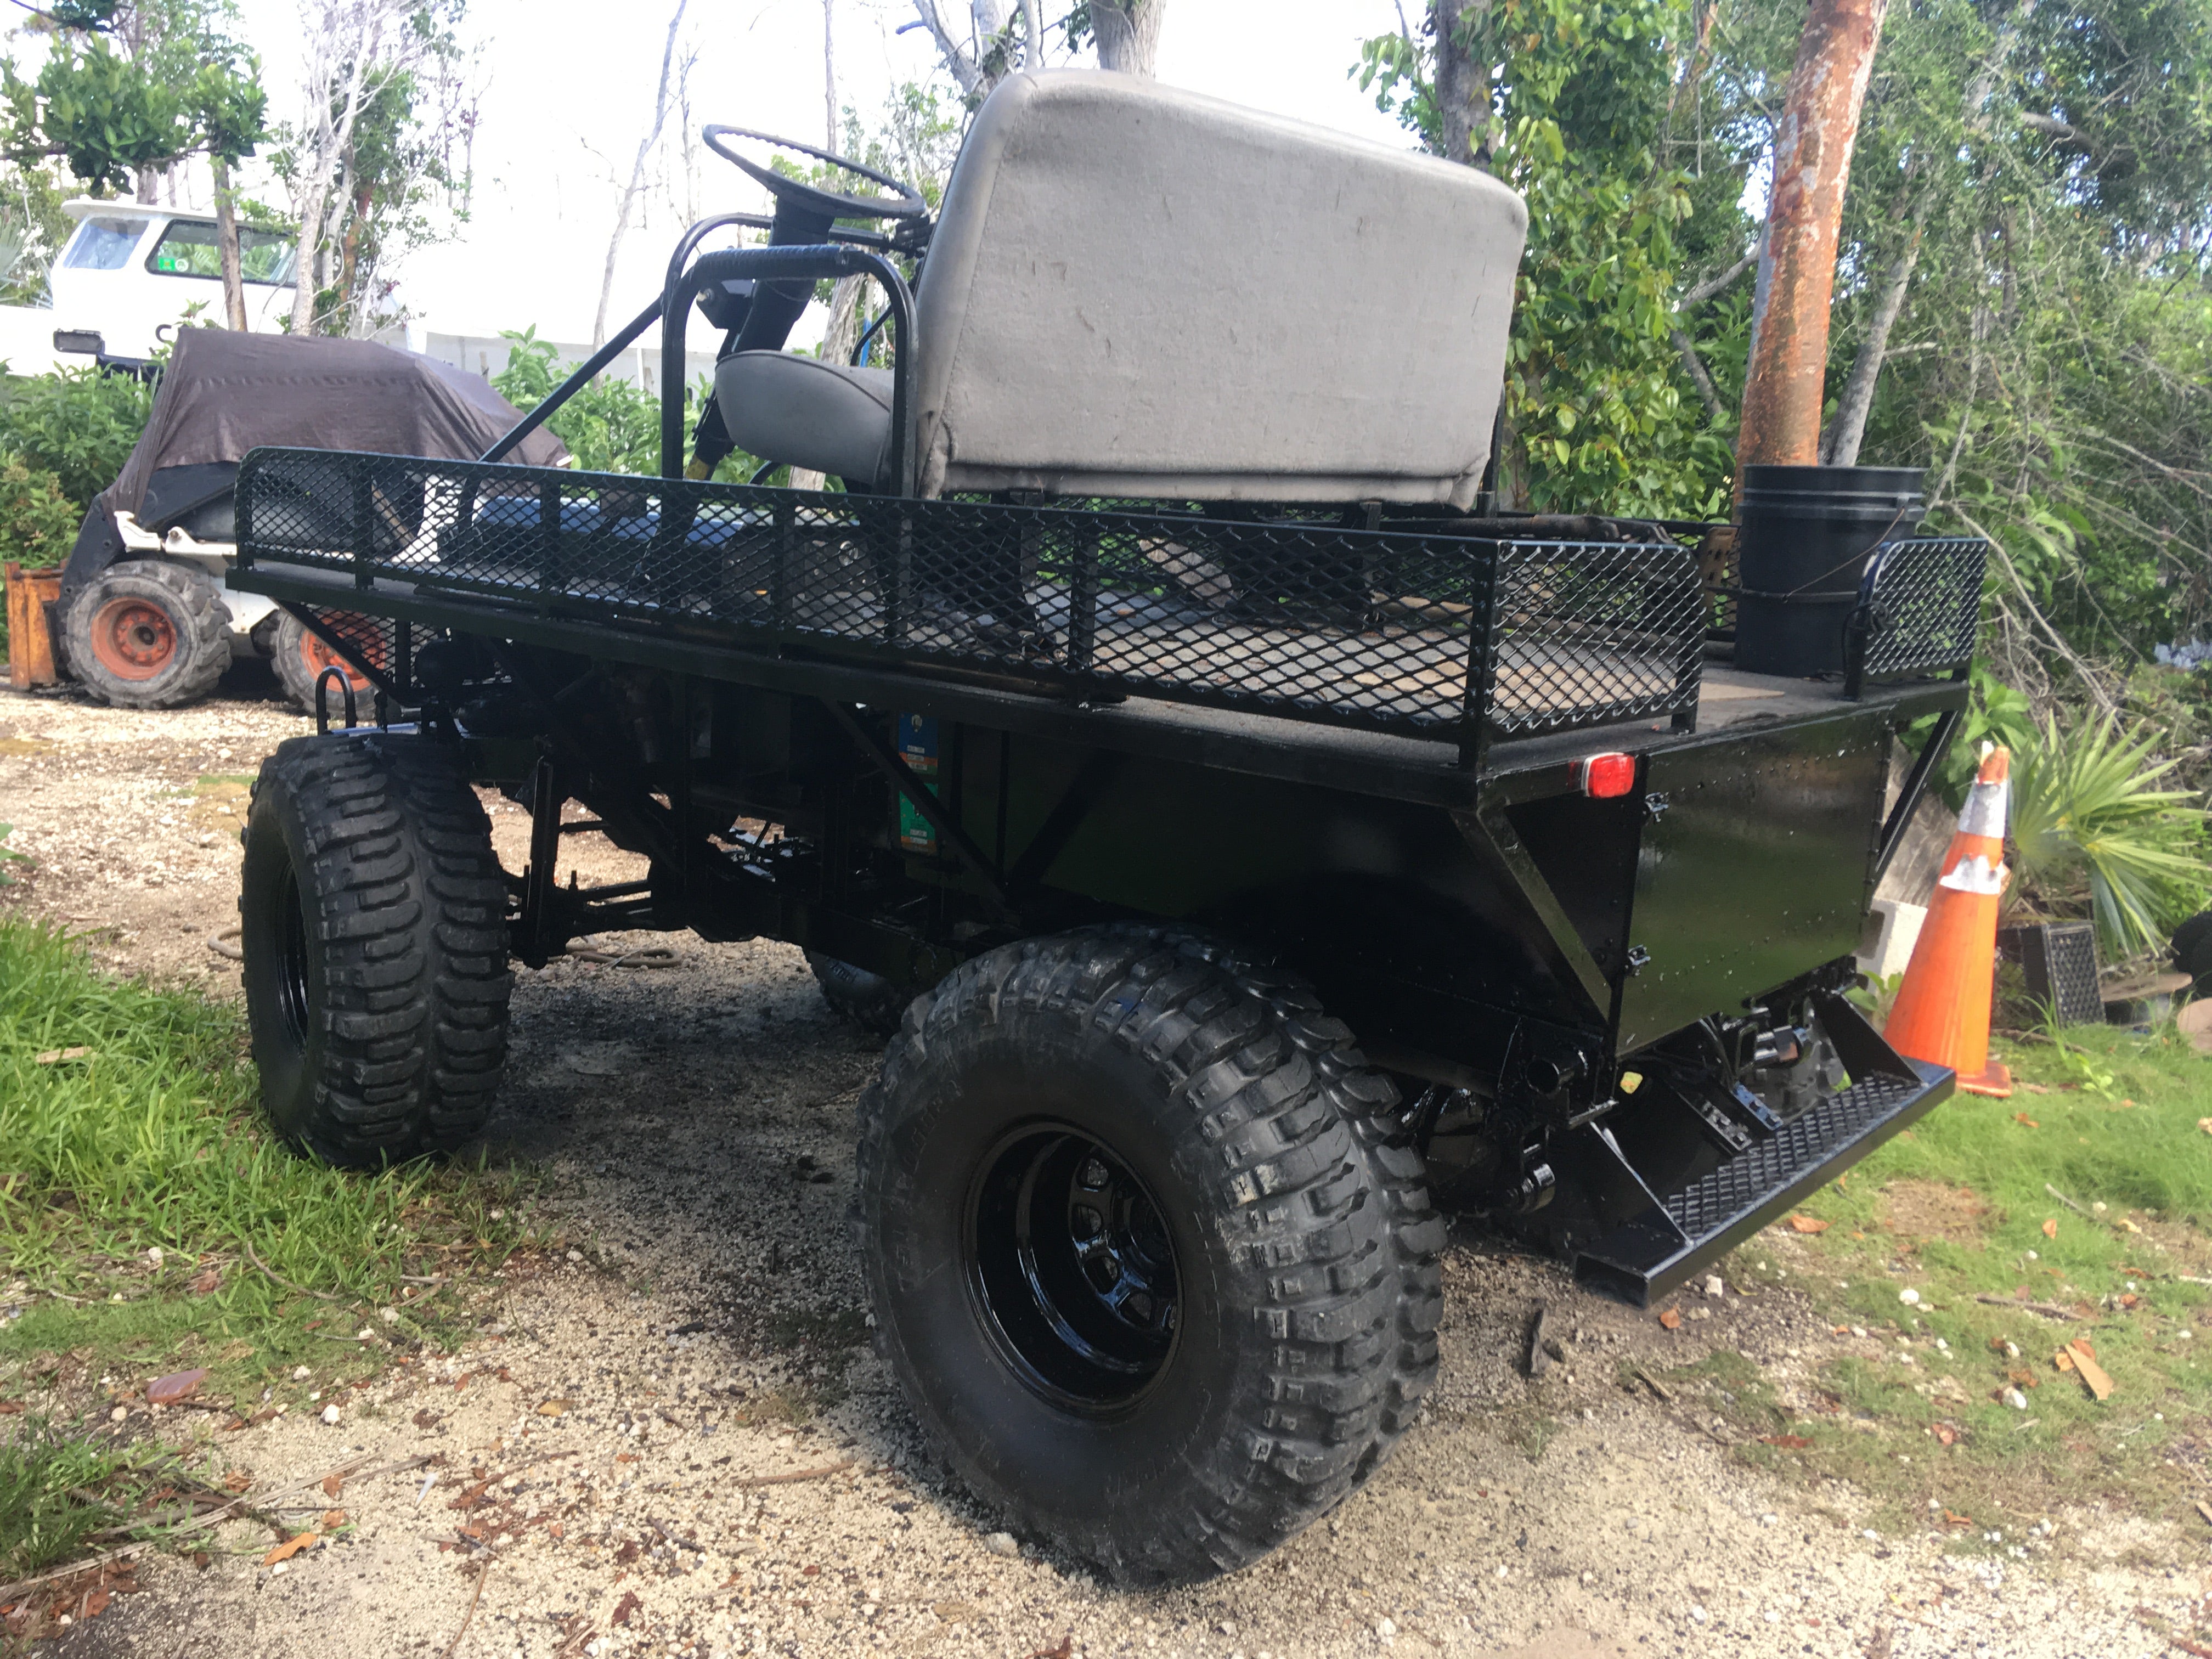 Home Made Swamp Buggy came sex